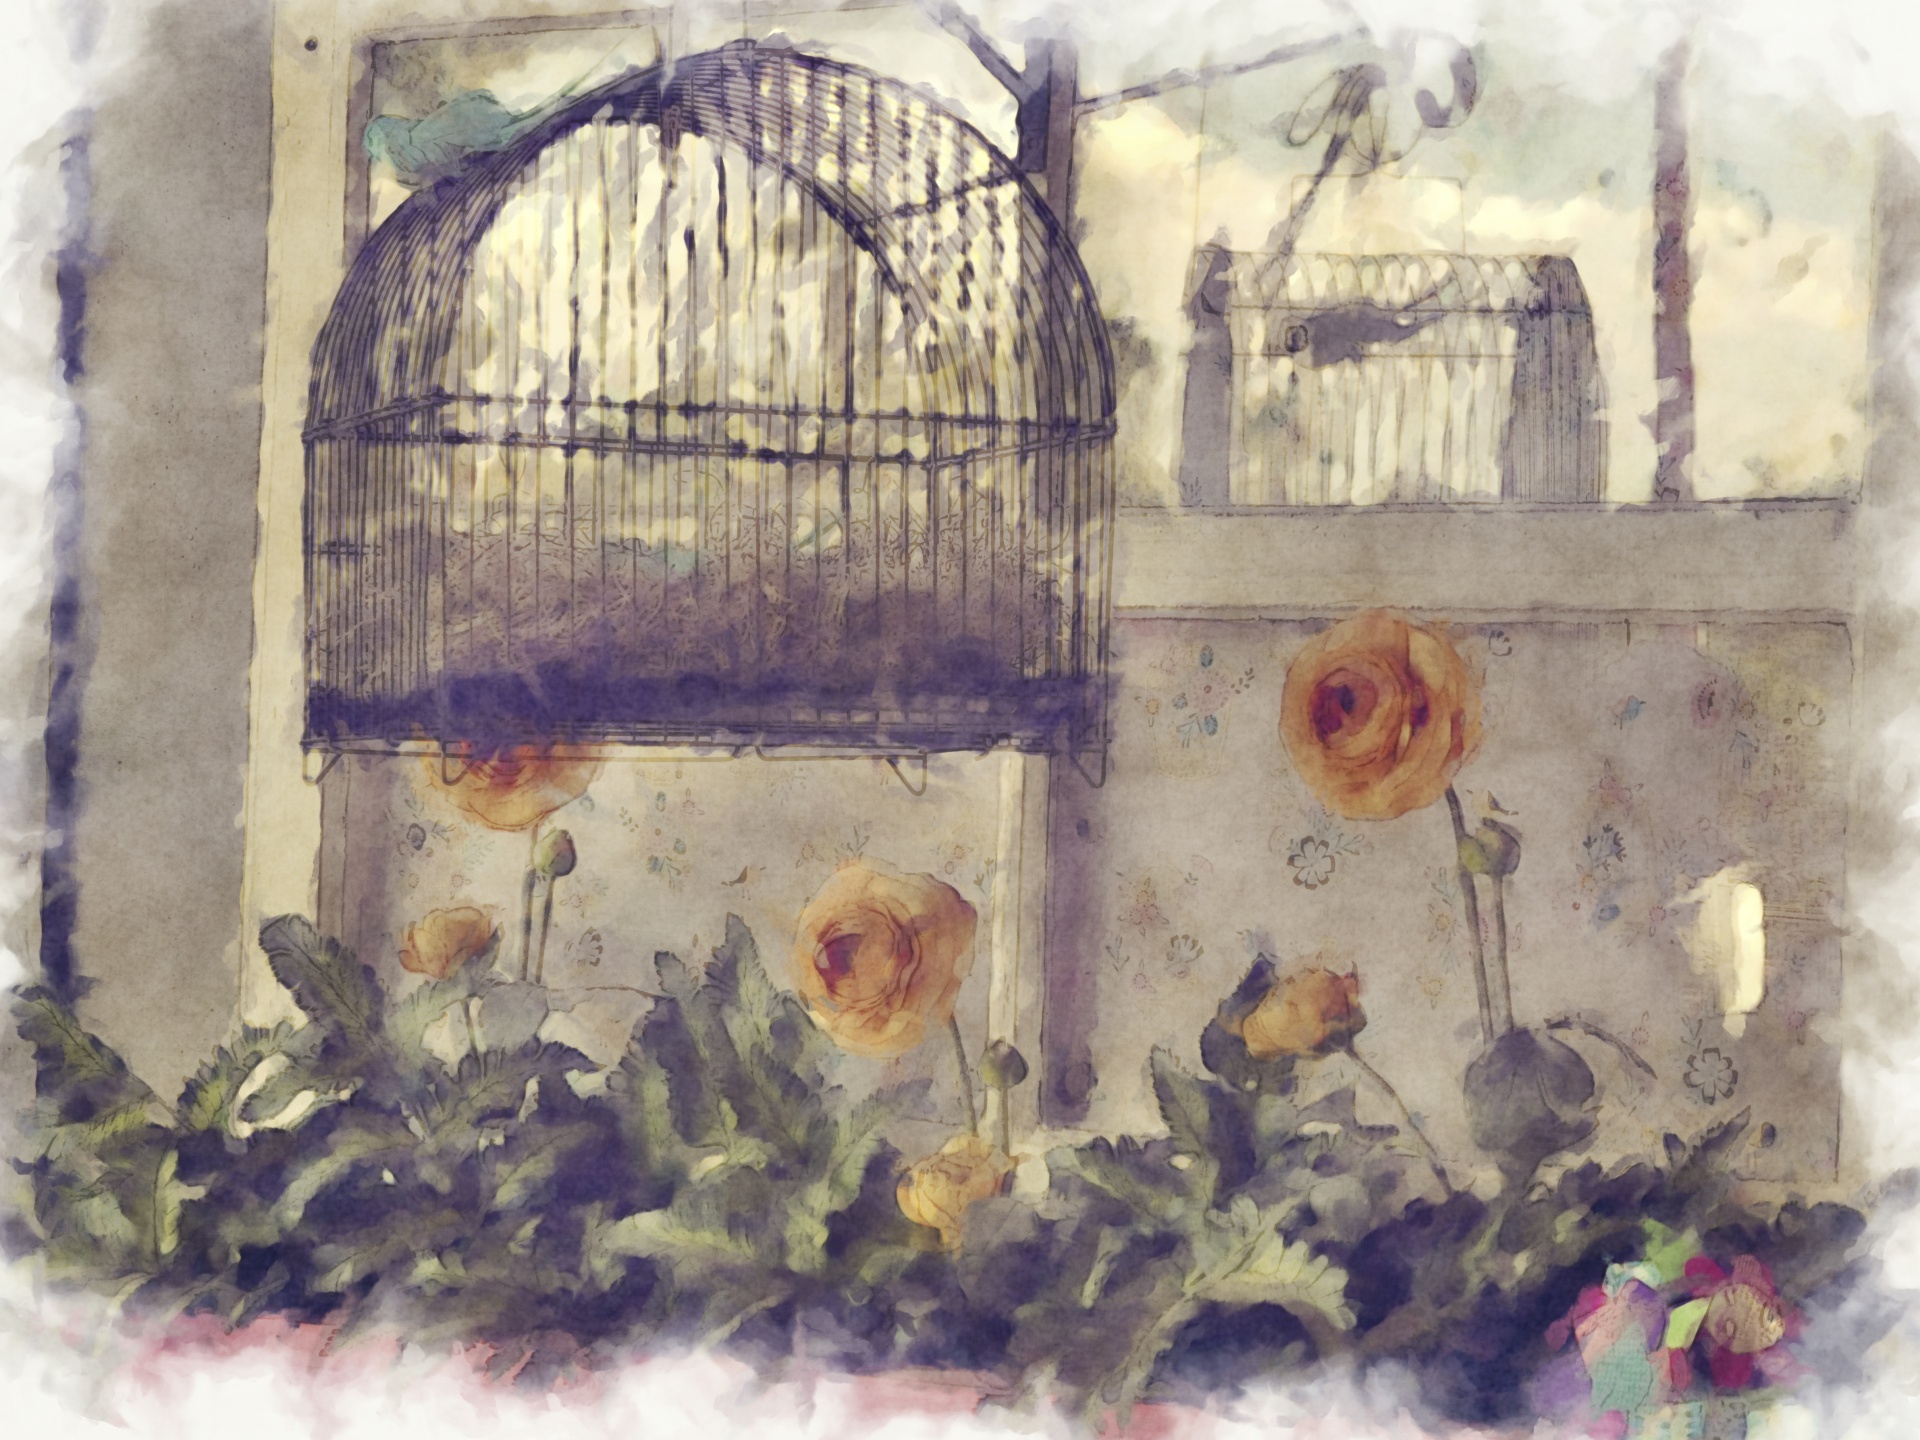 Artistic rendering of old bird cages